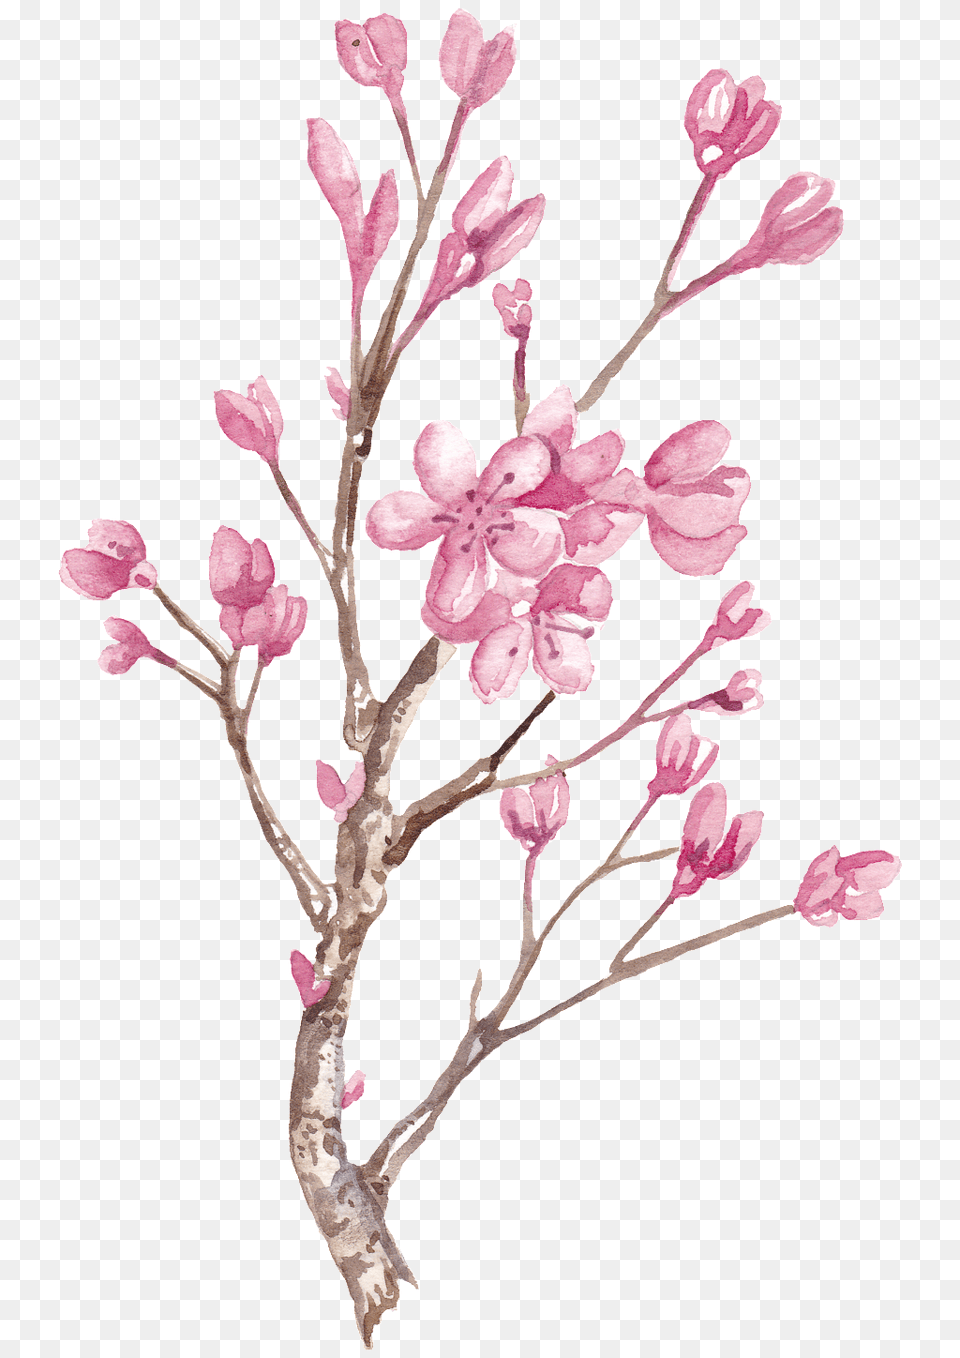 Hand Painted Winter Plum Blossom Branch Transparent Free, Flower, Plant, Cherry Blossom Png